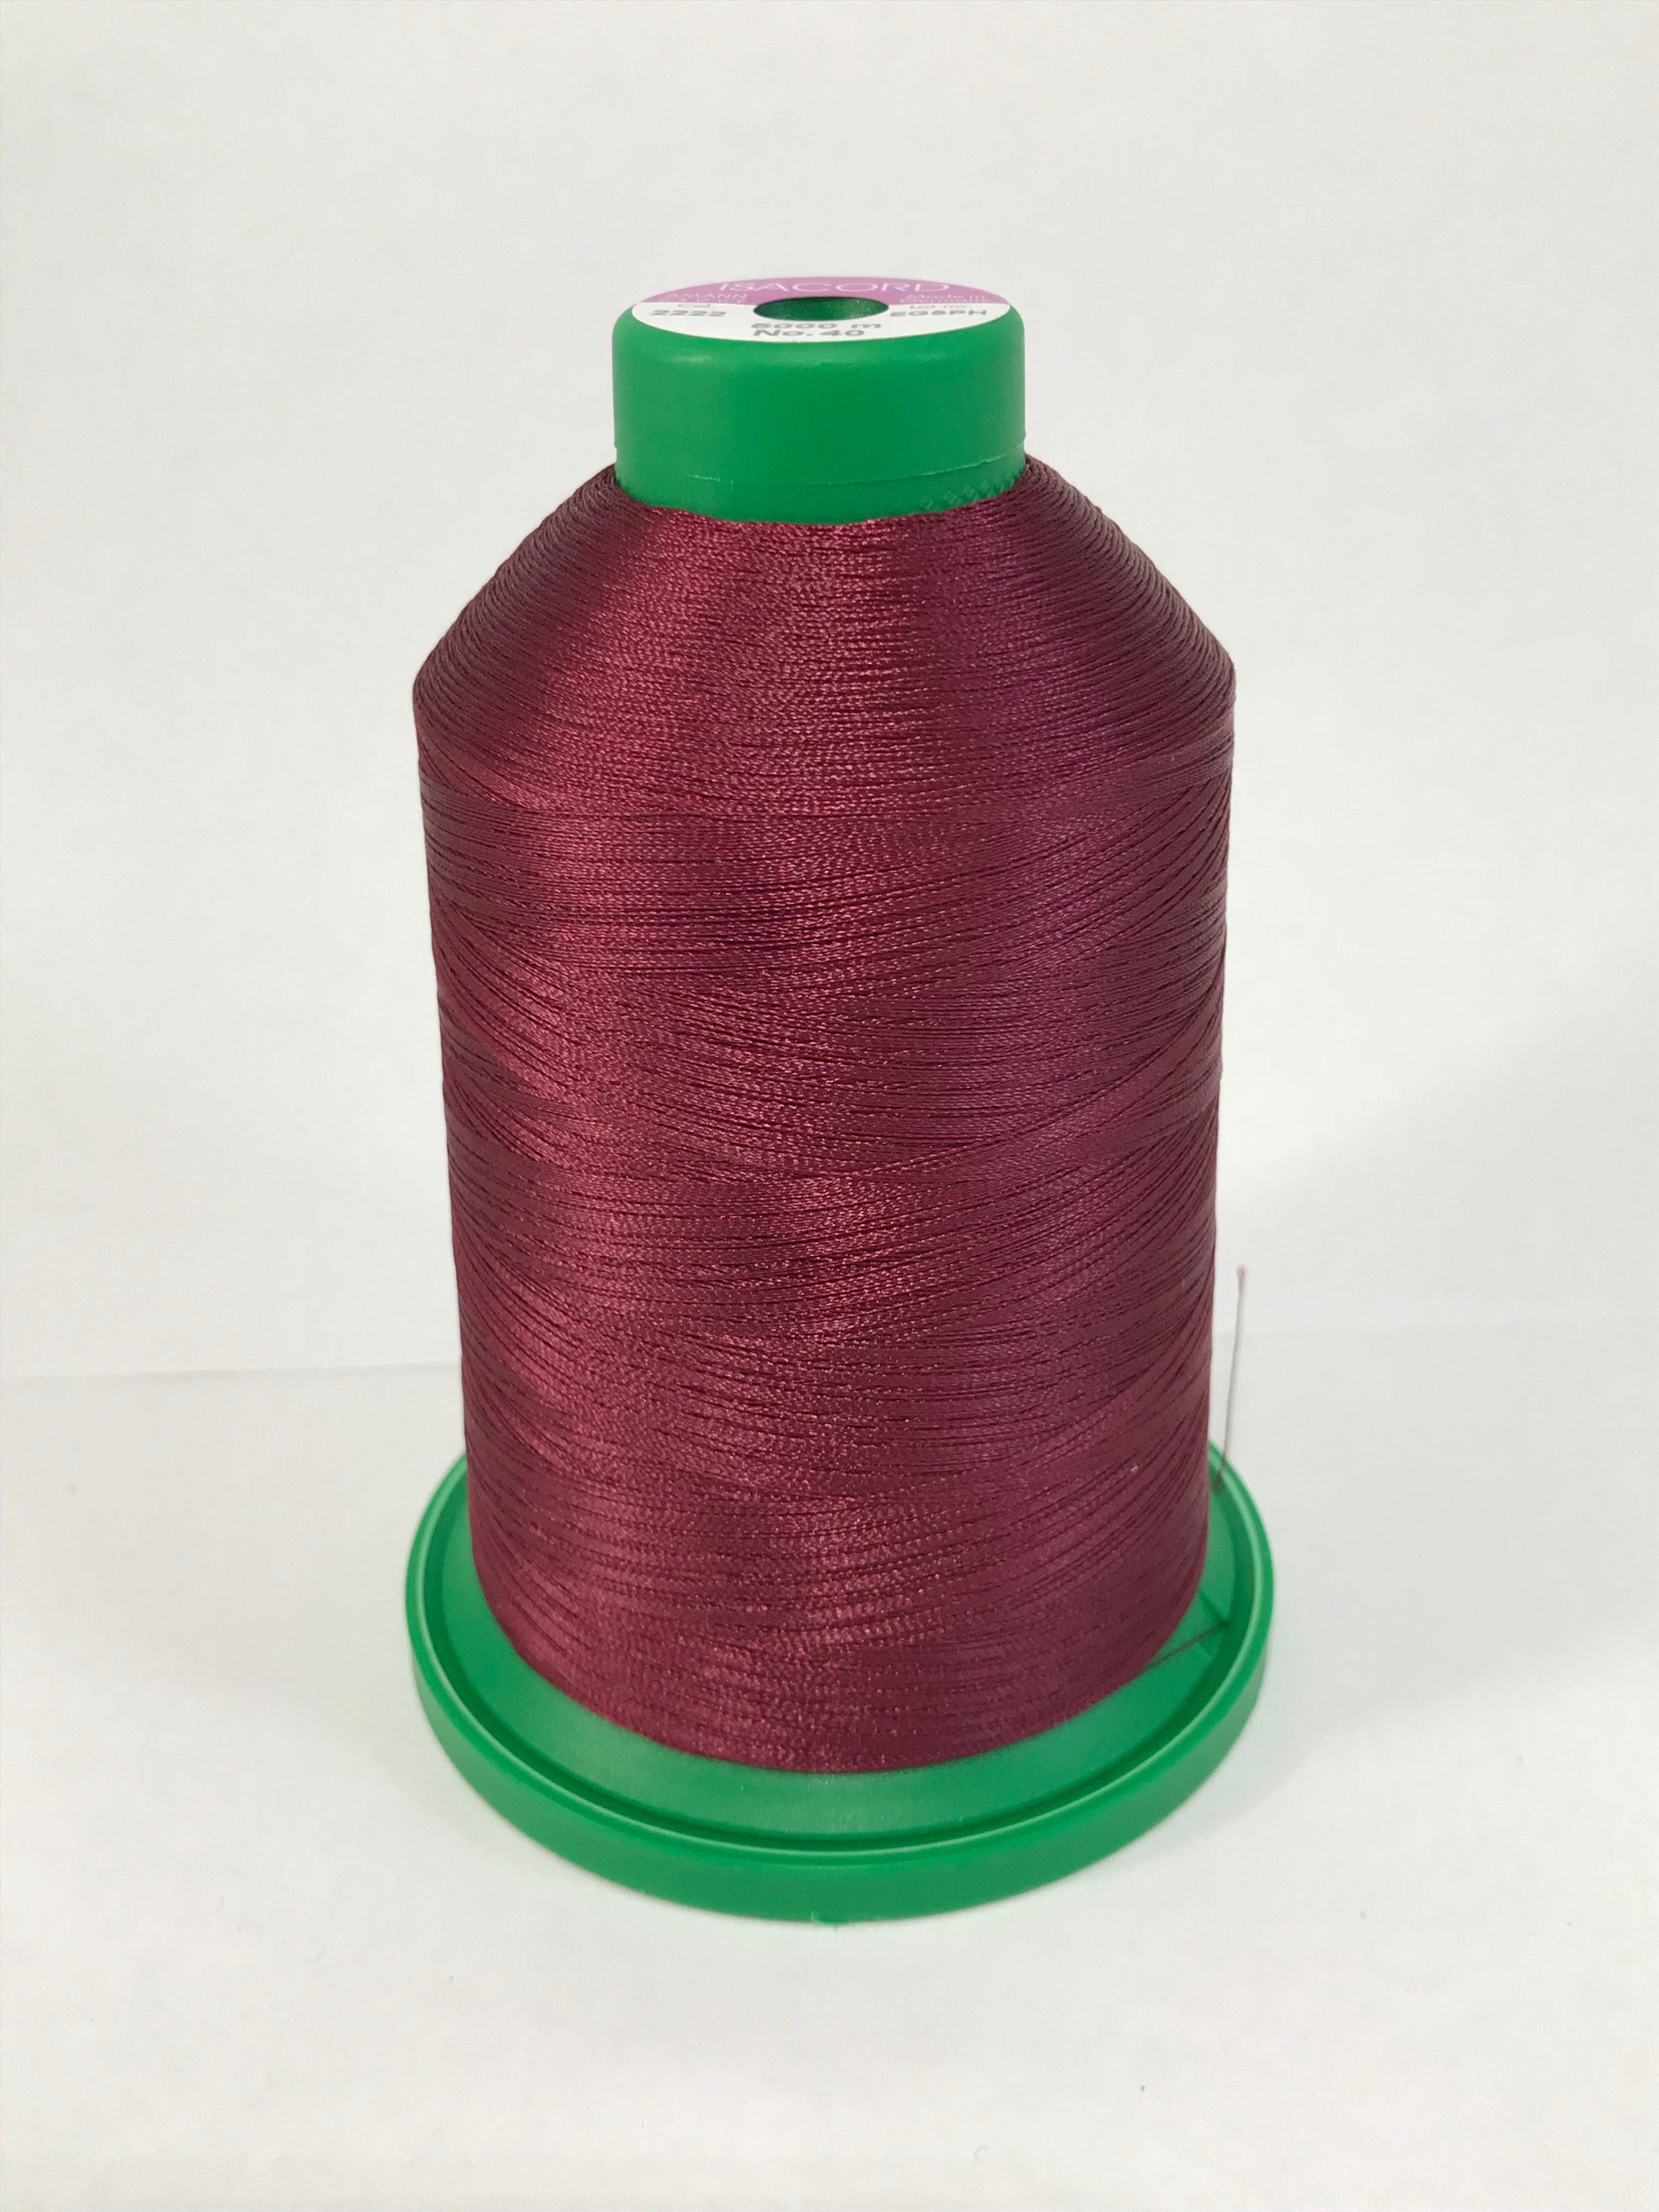 2222 - BURGUNDY - ISACORD EMBROIDERY THREAD 40 WT